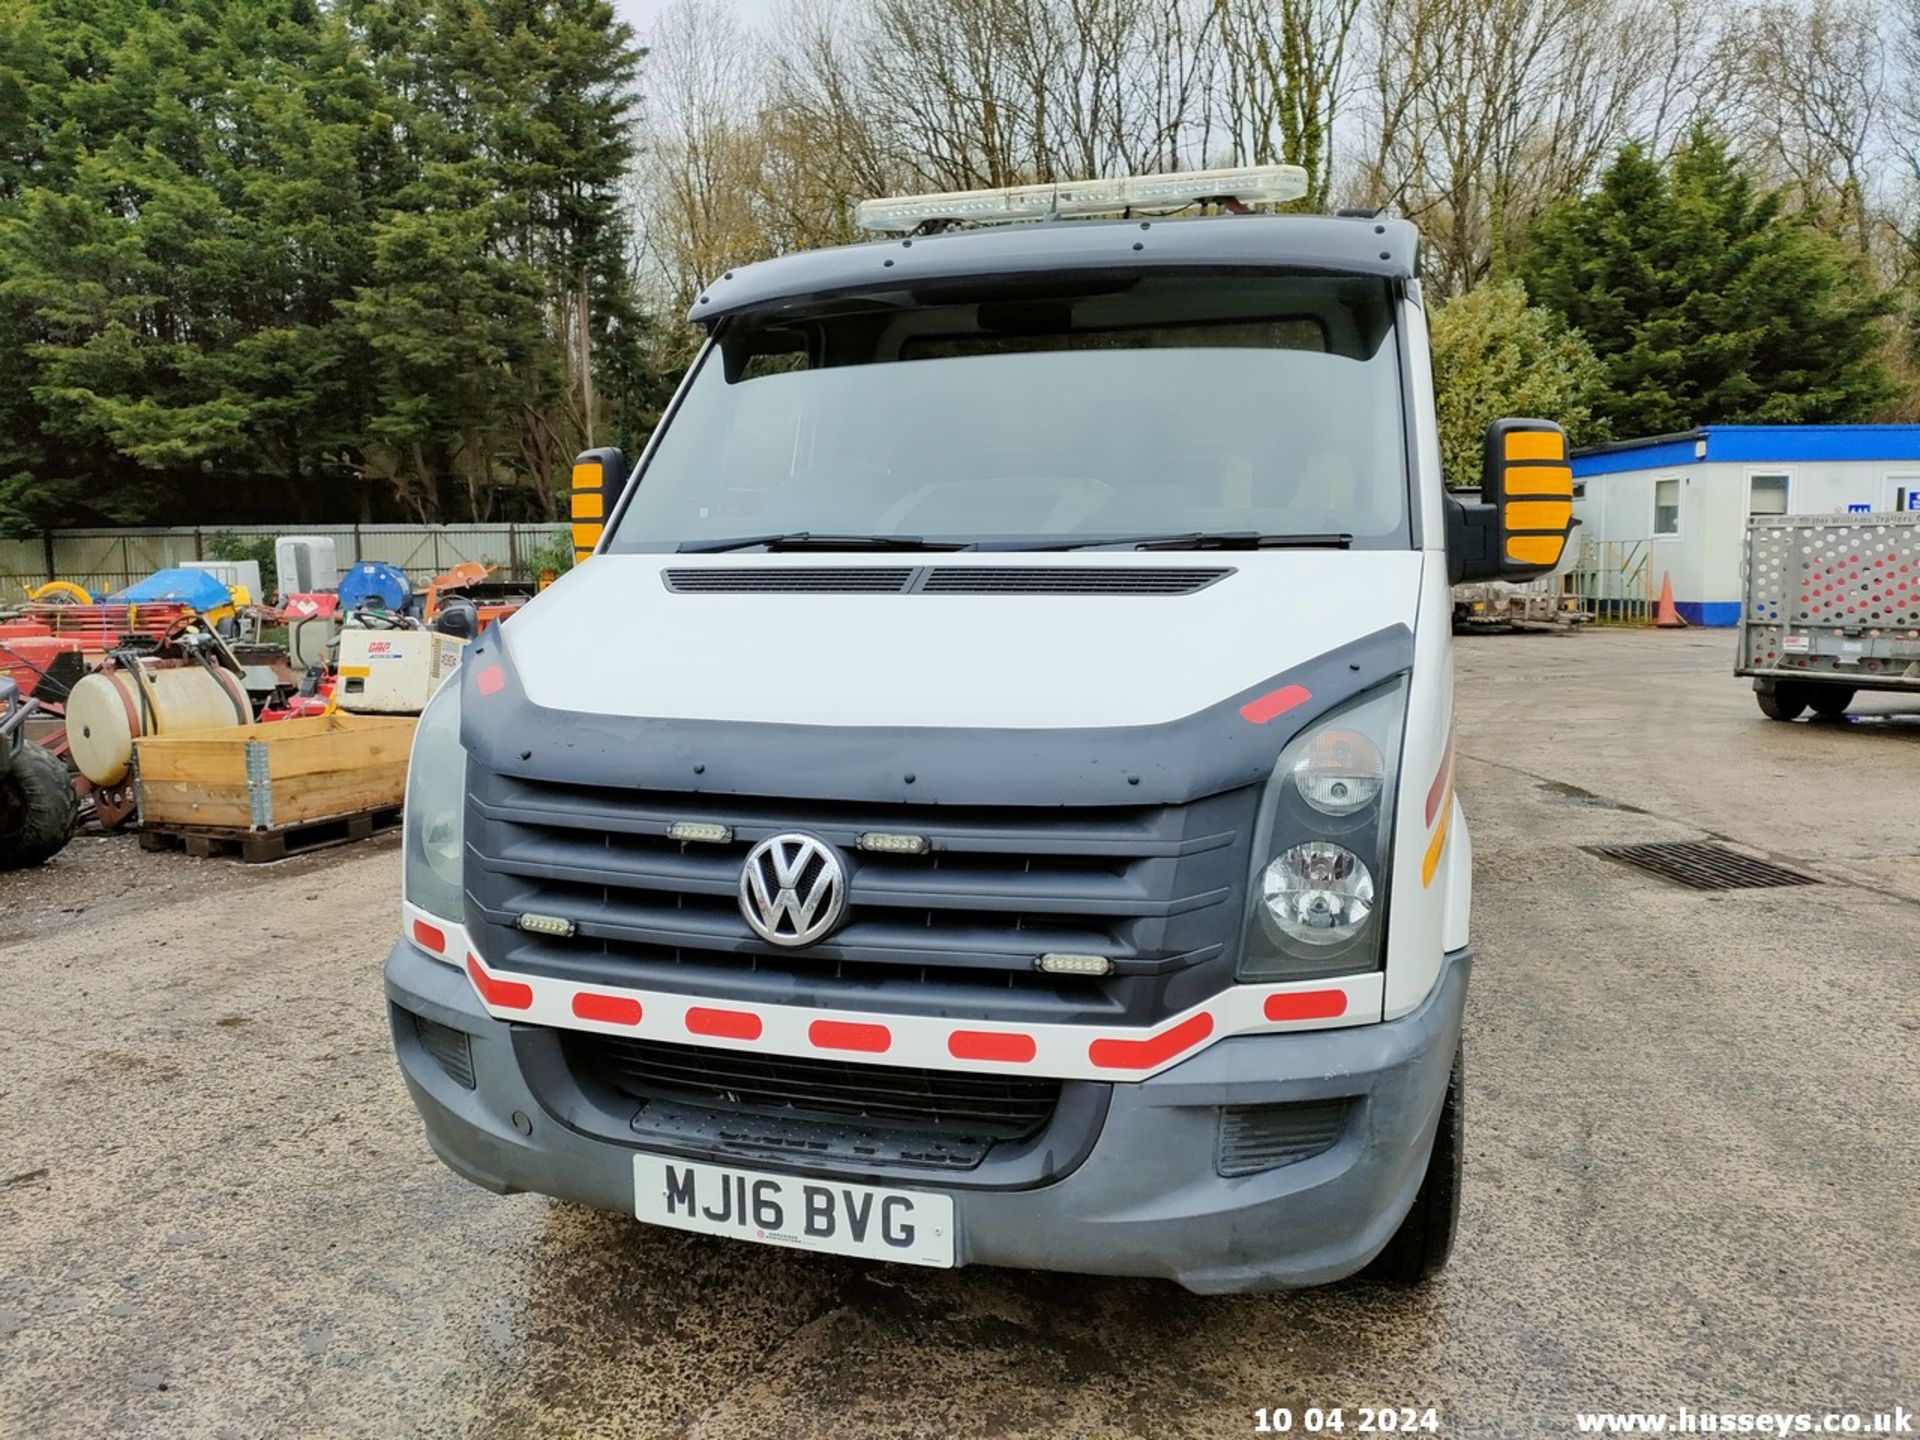 16/16 VOLKSWAGEN CRAFTER CR35 TDI - 1968cc 2dr (White, 146k) - Image 11 of 52